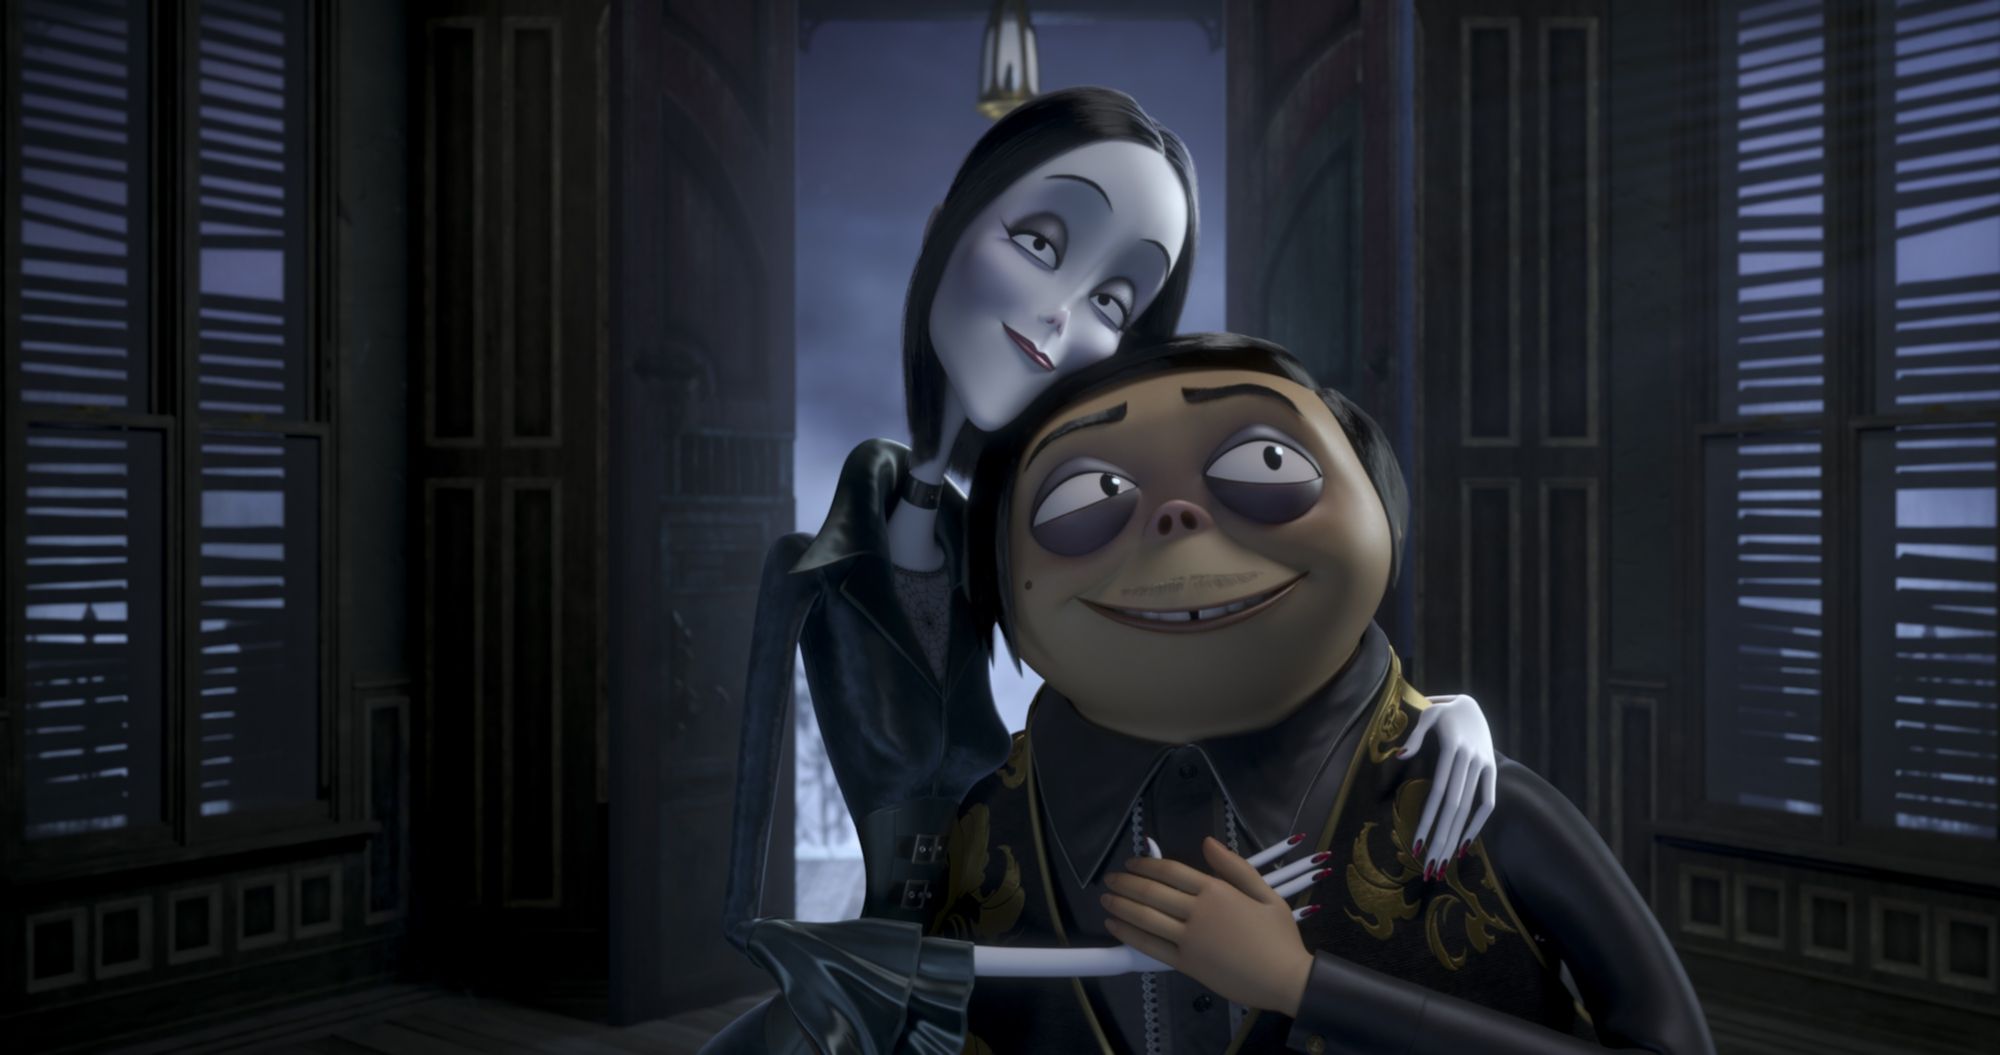 Morticia Addams and Gomez Addams from MGM's The Addams Family (2019)